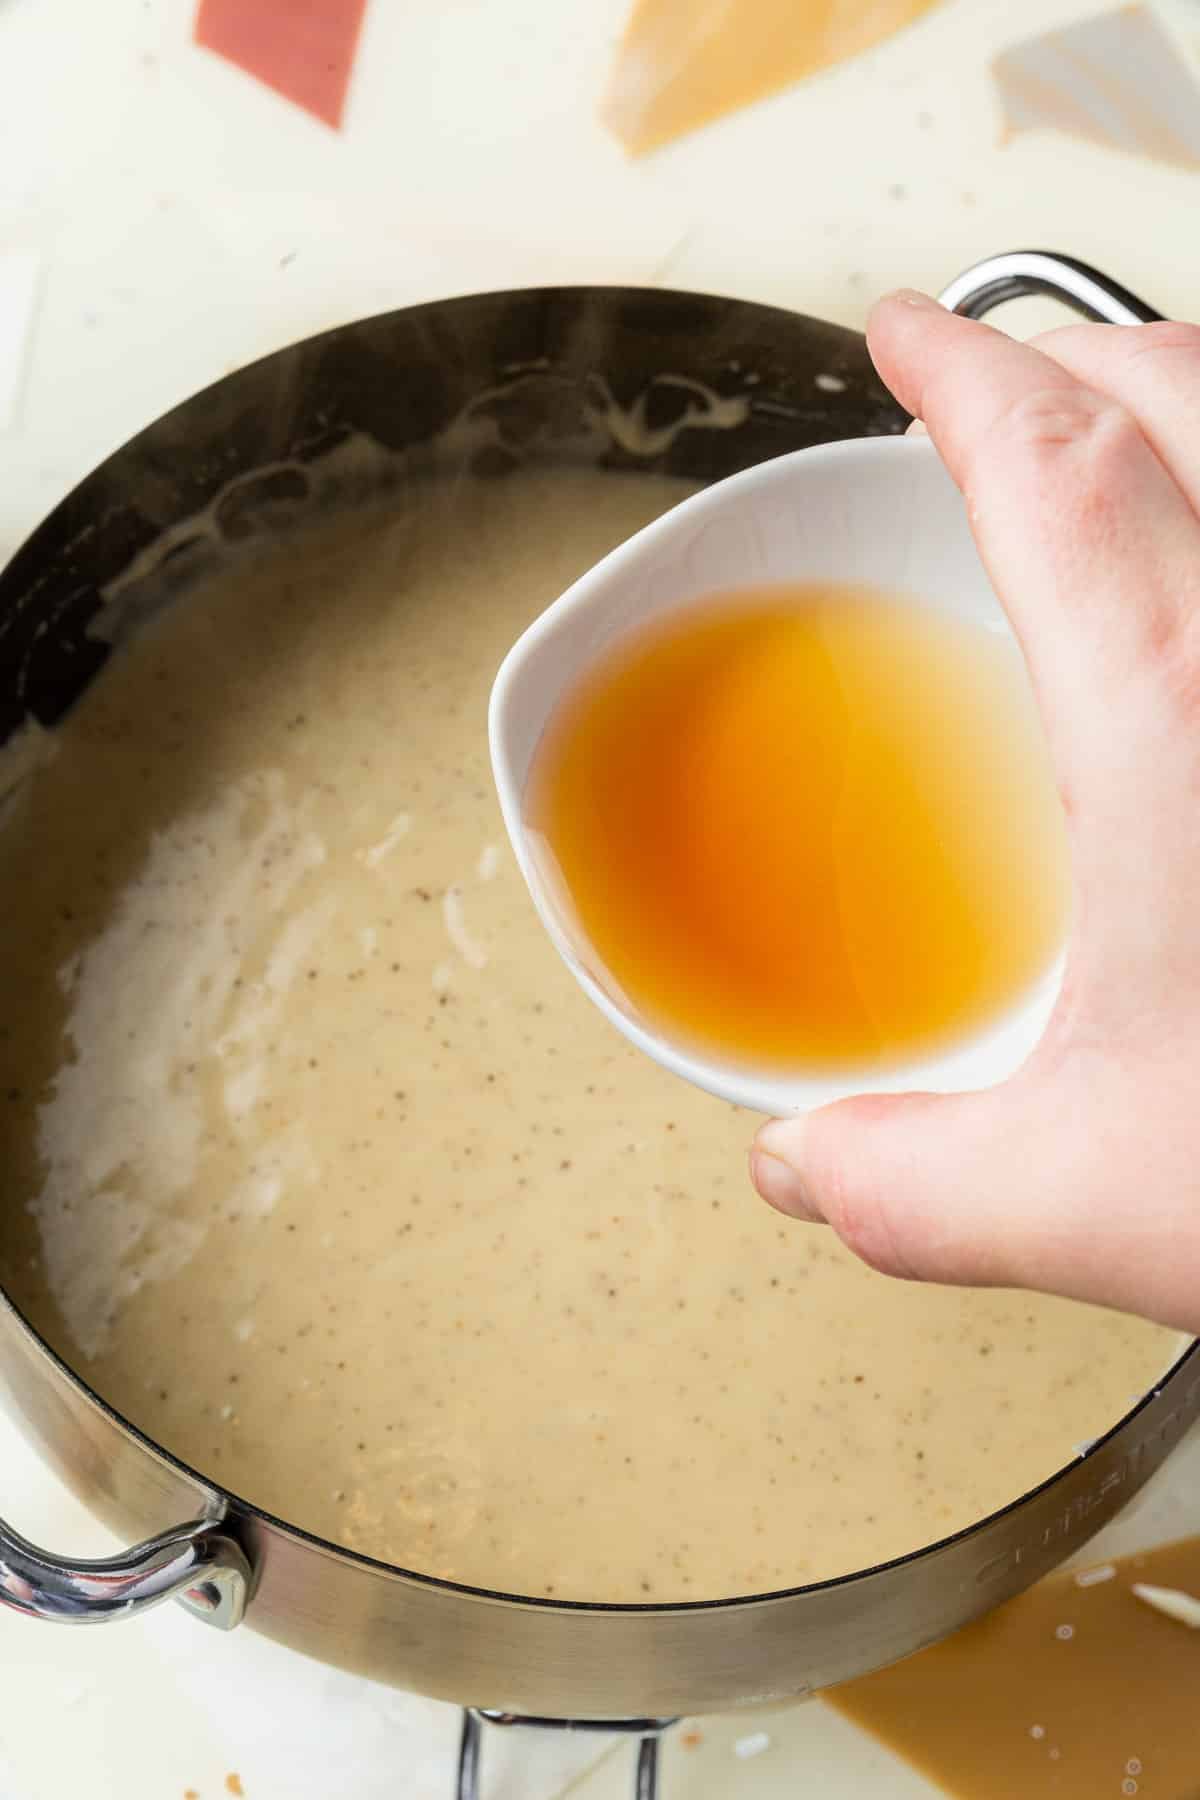 A hand pouring a ramekin of Cognac into a fondue pot of melted cheese.